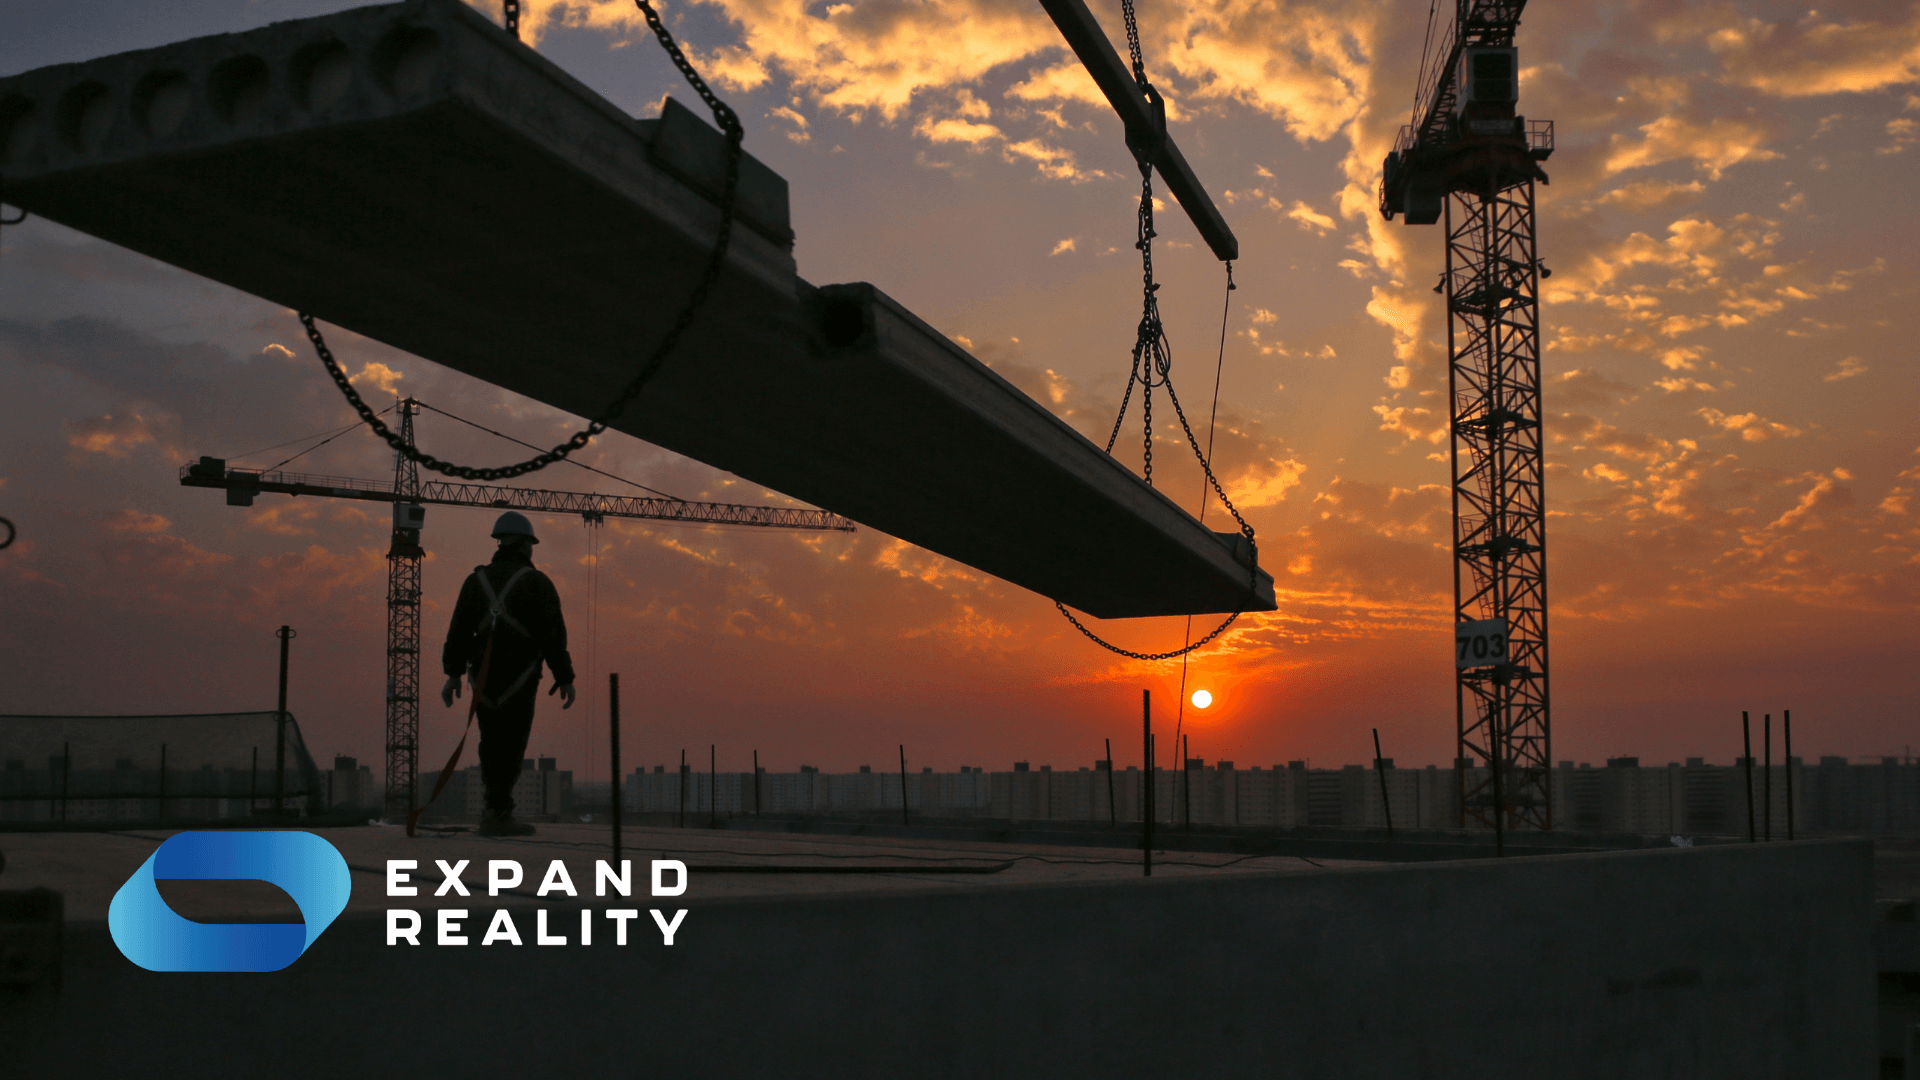 Extended reality (XR) technology is helping construction firms improve planning, safety and productivity. Learn more in our industry guide.